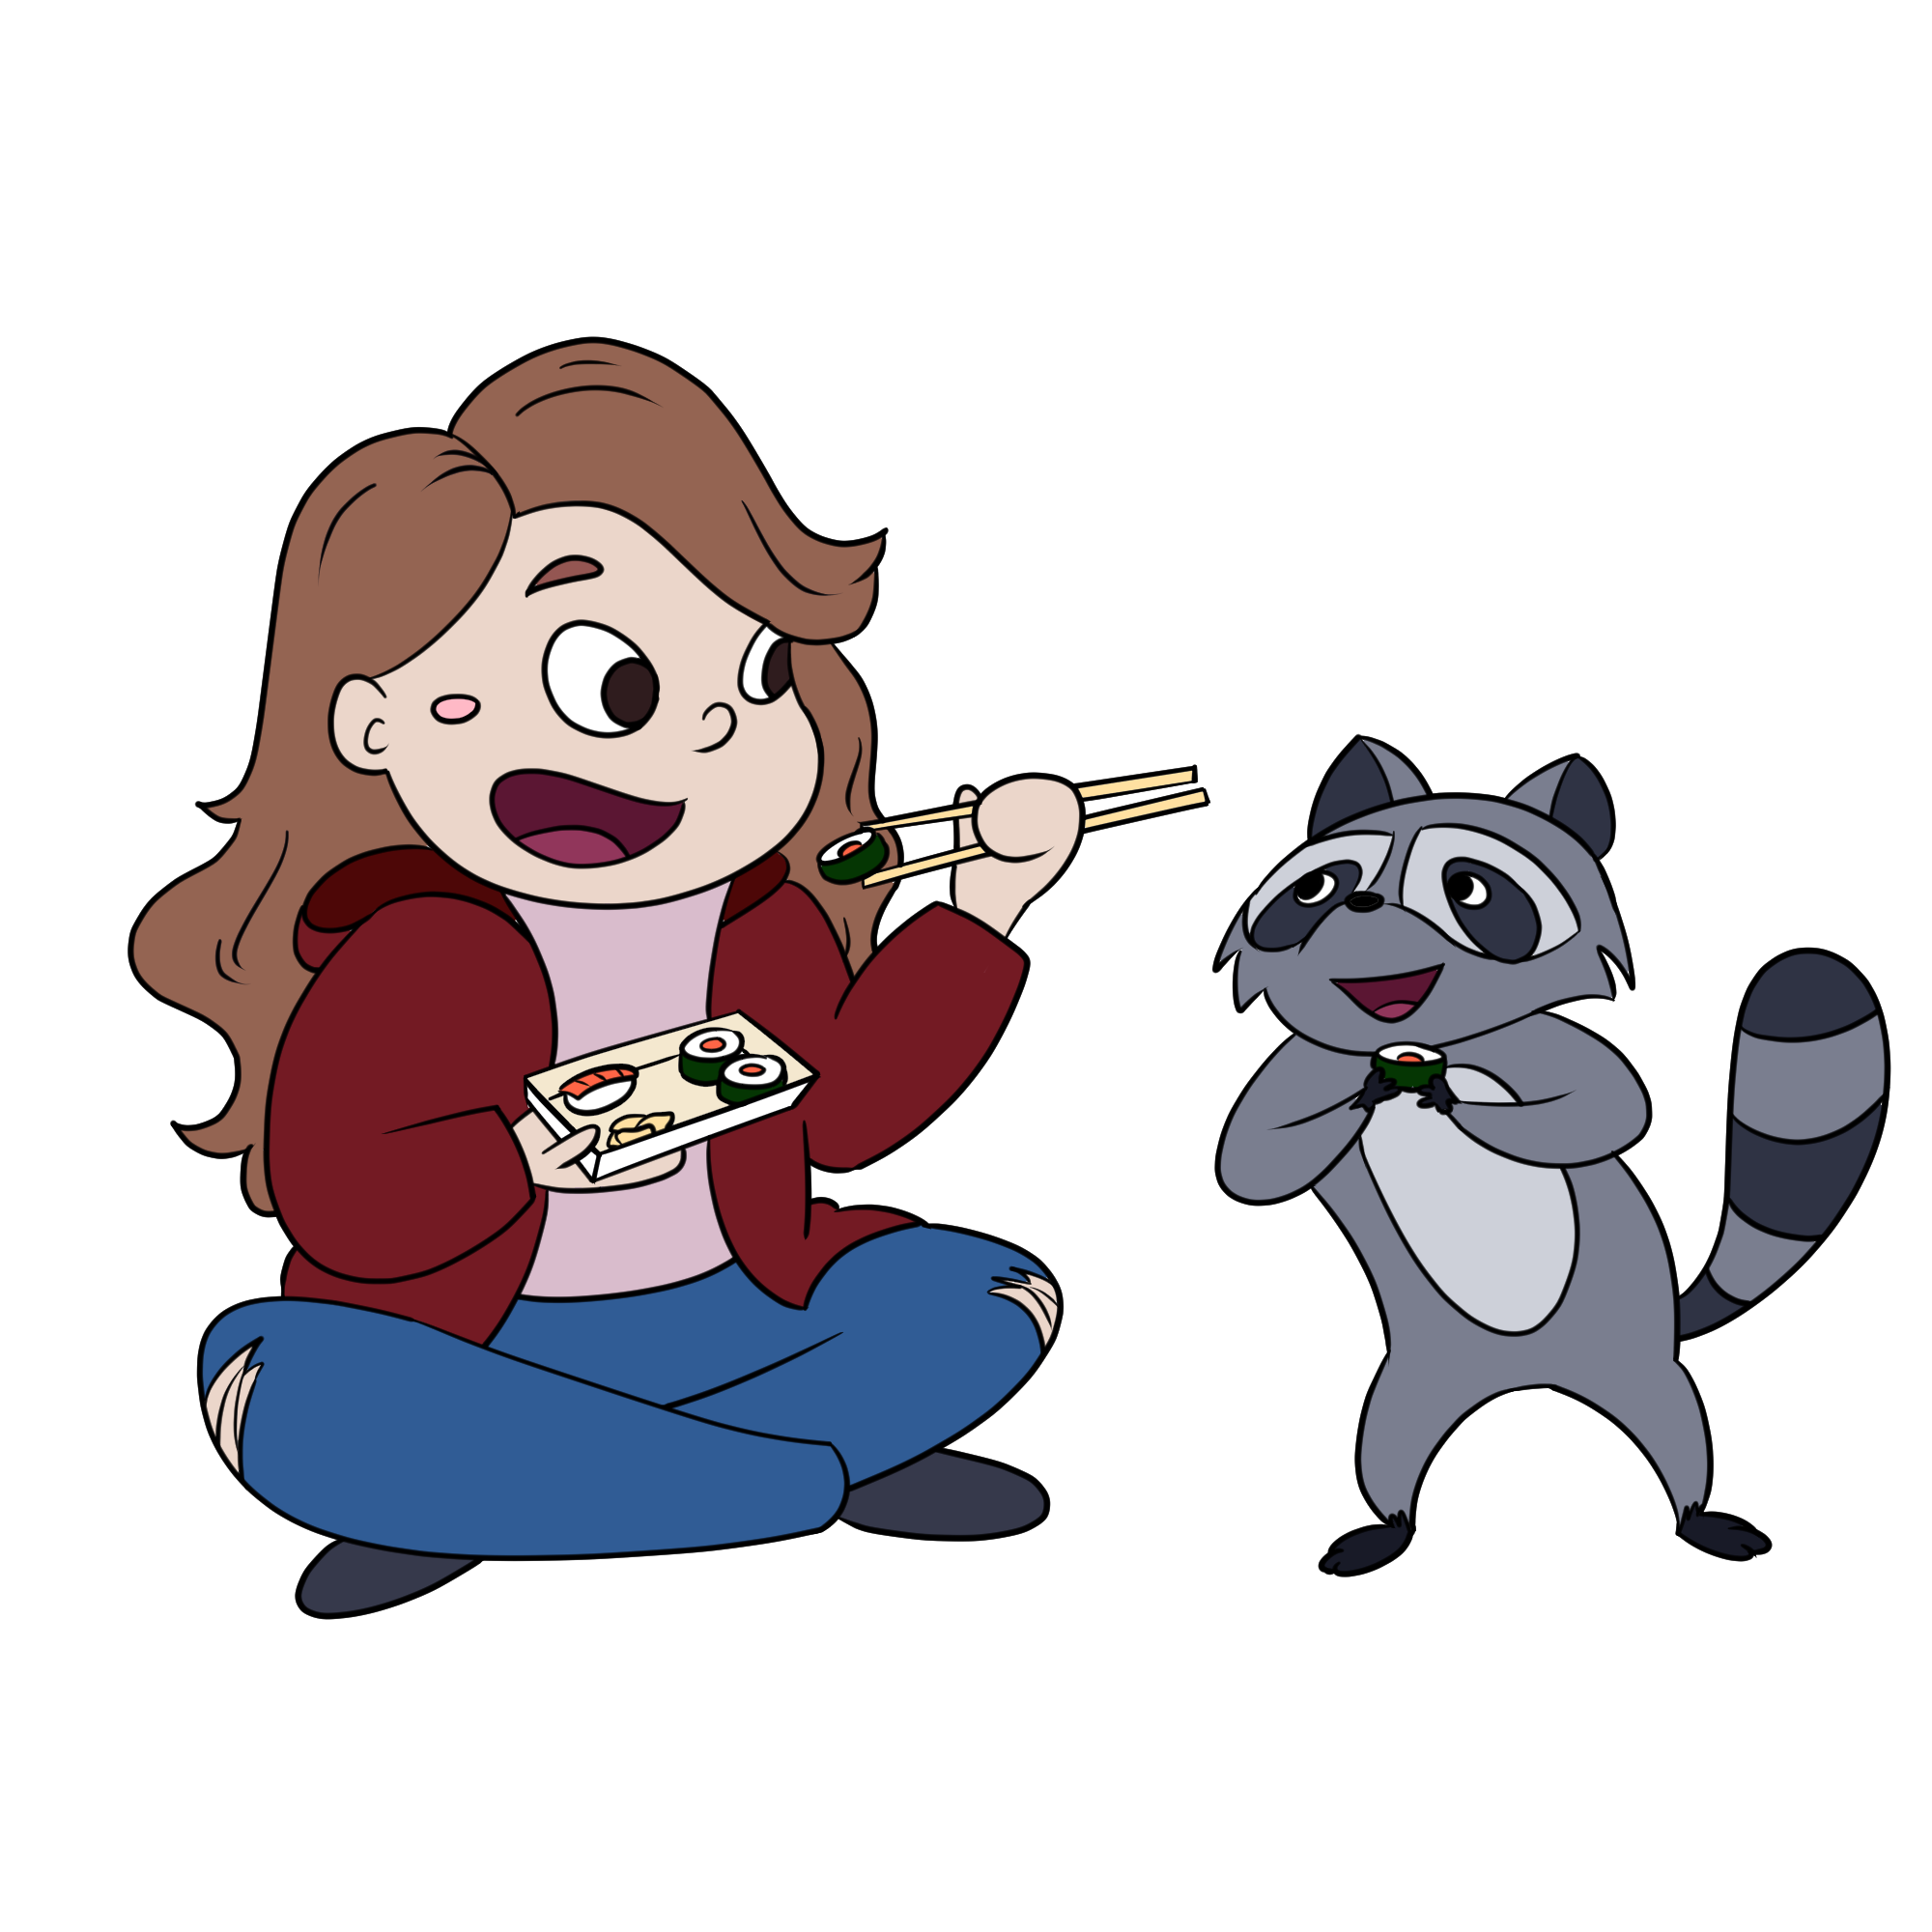 A woman sits eating sushi while a raccoon enjoys a piece of sushi next to her. The person is white with long brown hair and wears ripped jeans, a pink shirt, and a red hoodie sitting with her legs crossed and a plate of sushi. The raccoon stands on its back legs smiling back at her while holding sushi too.